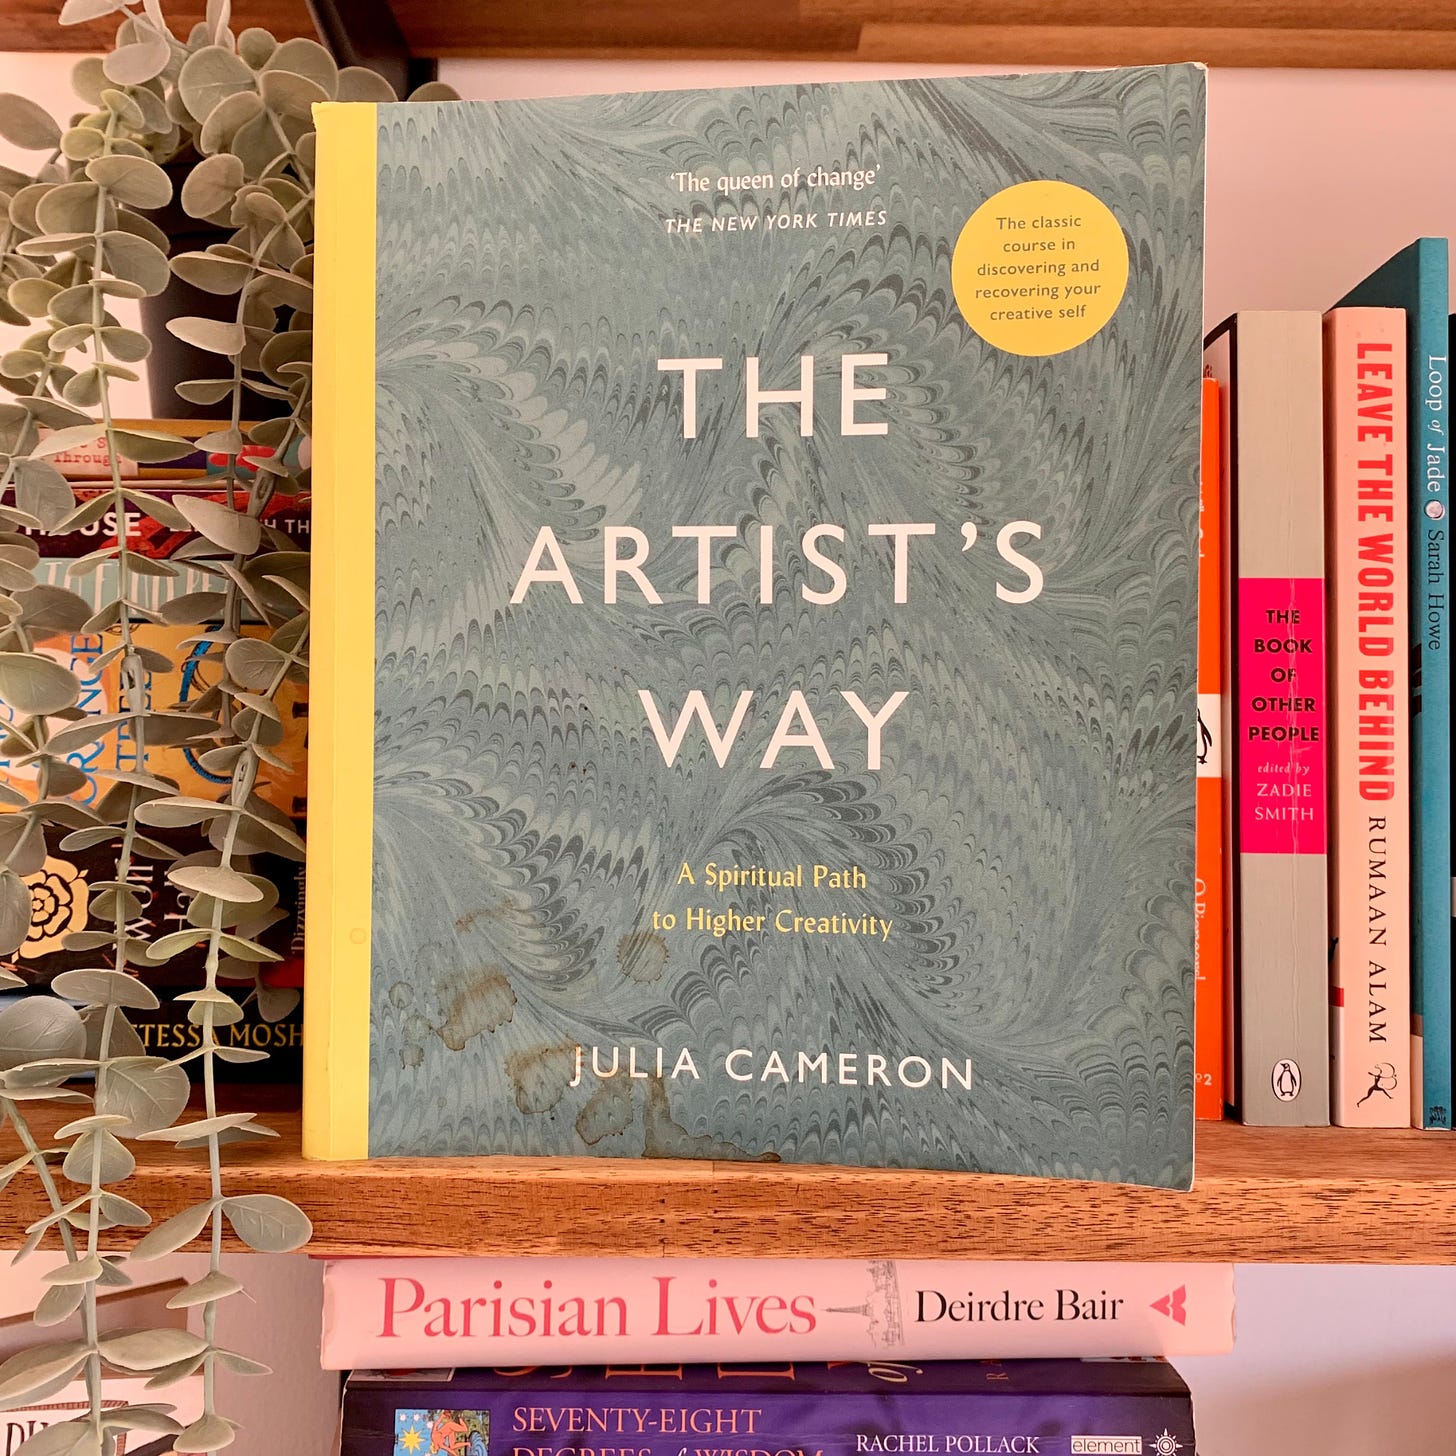 A paperback copy of The Artist's Way by Julia Cameron, face out on a bookshelf